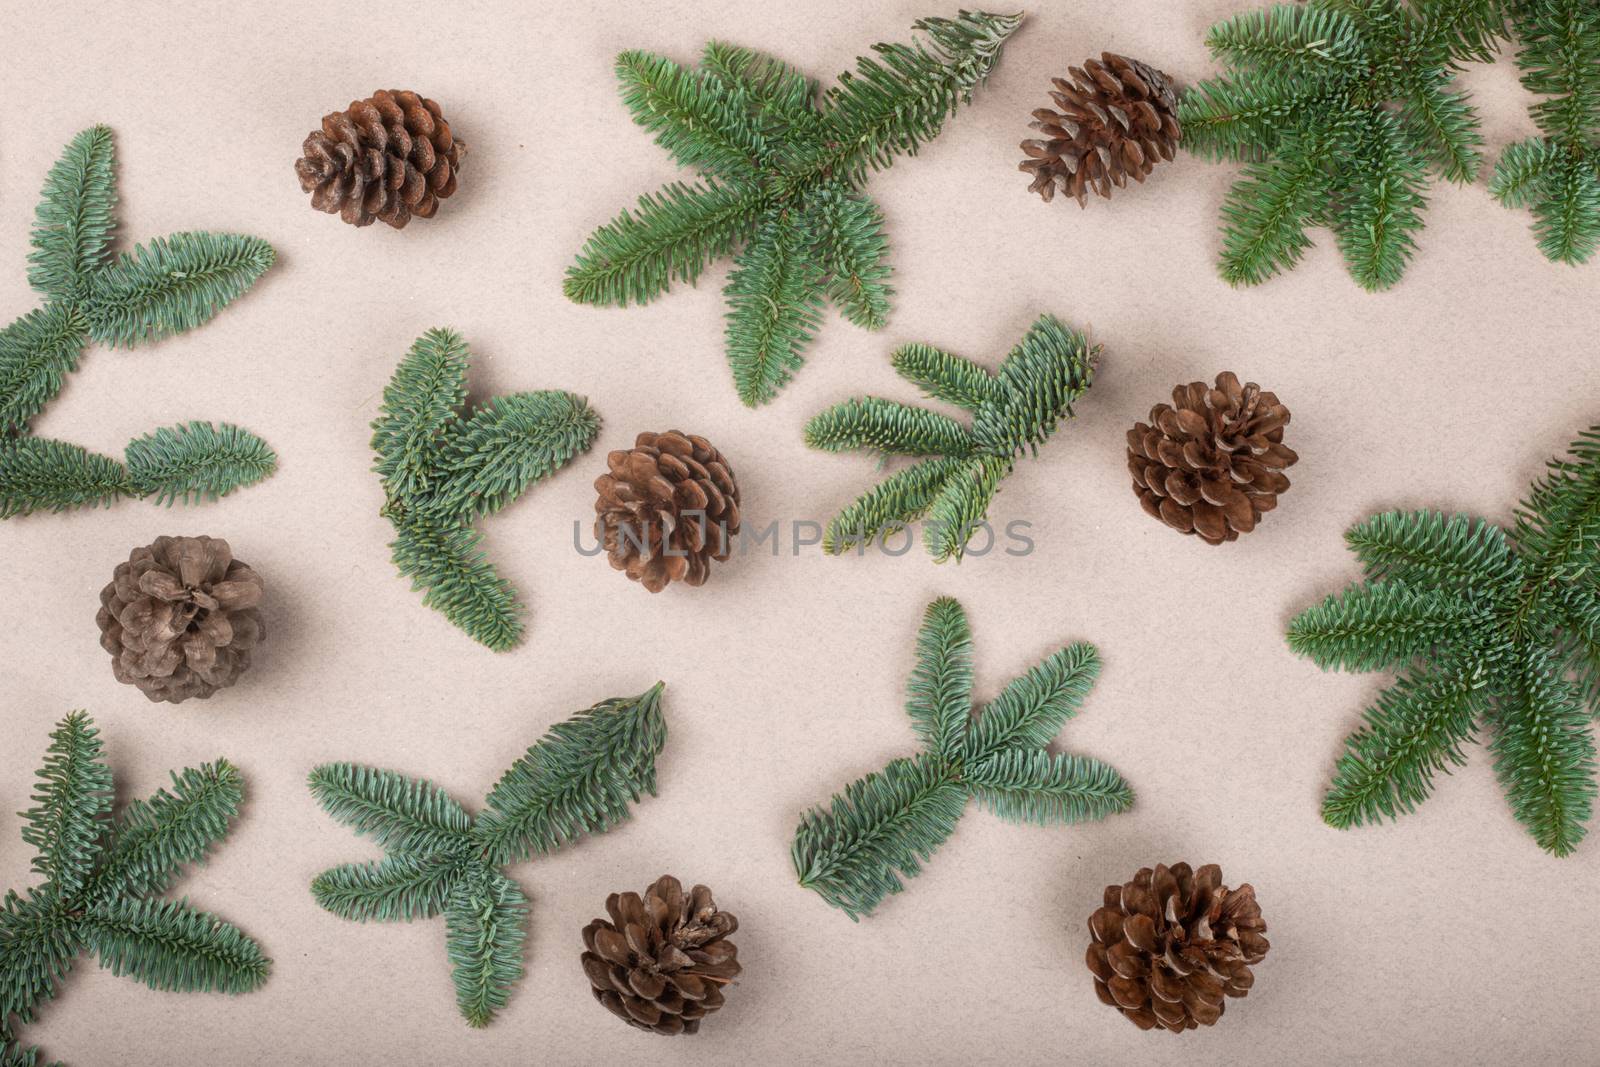 Christmas card light background with noble fir tree branches and pine cones